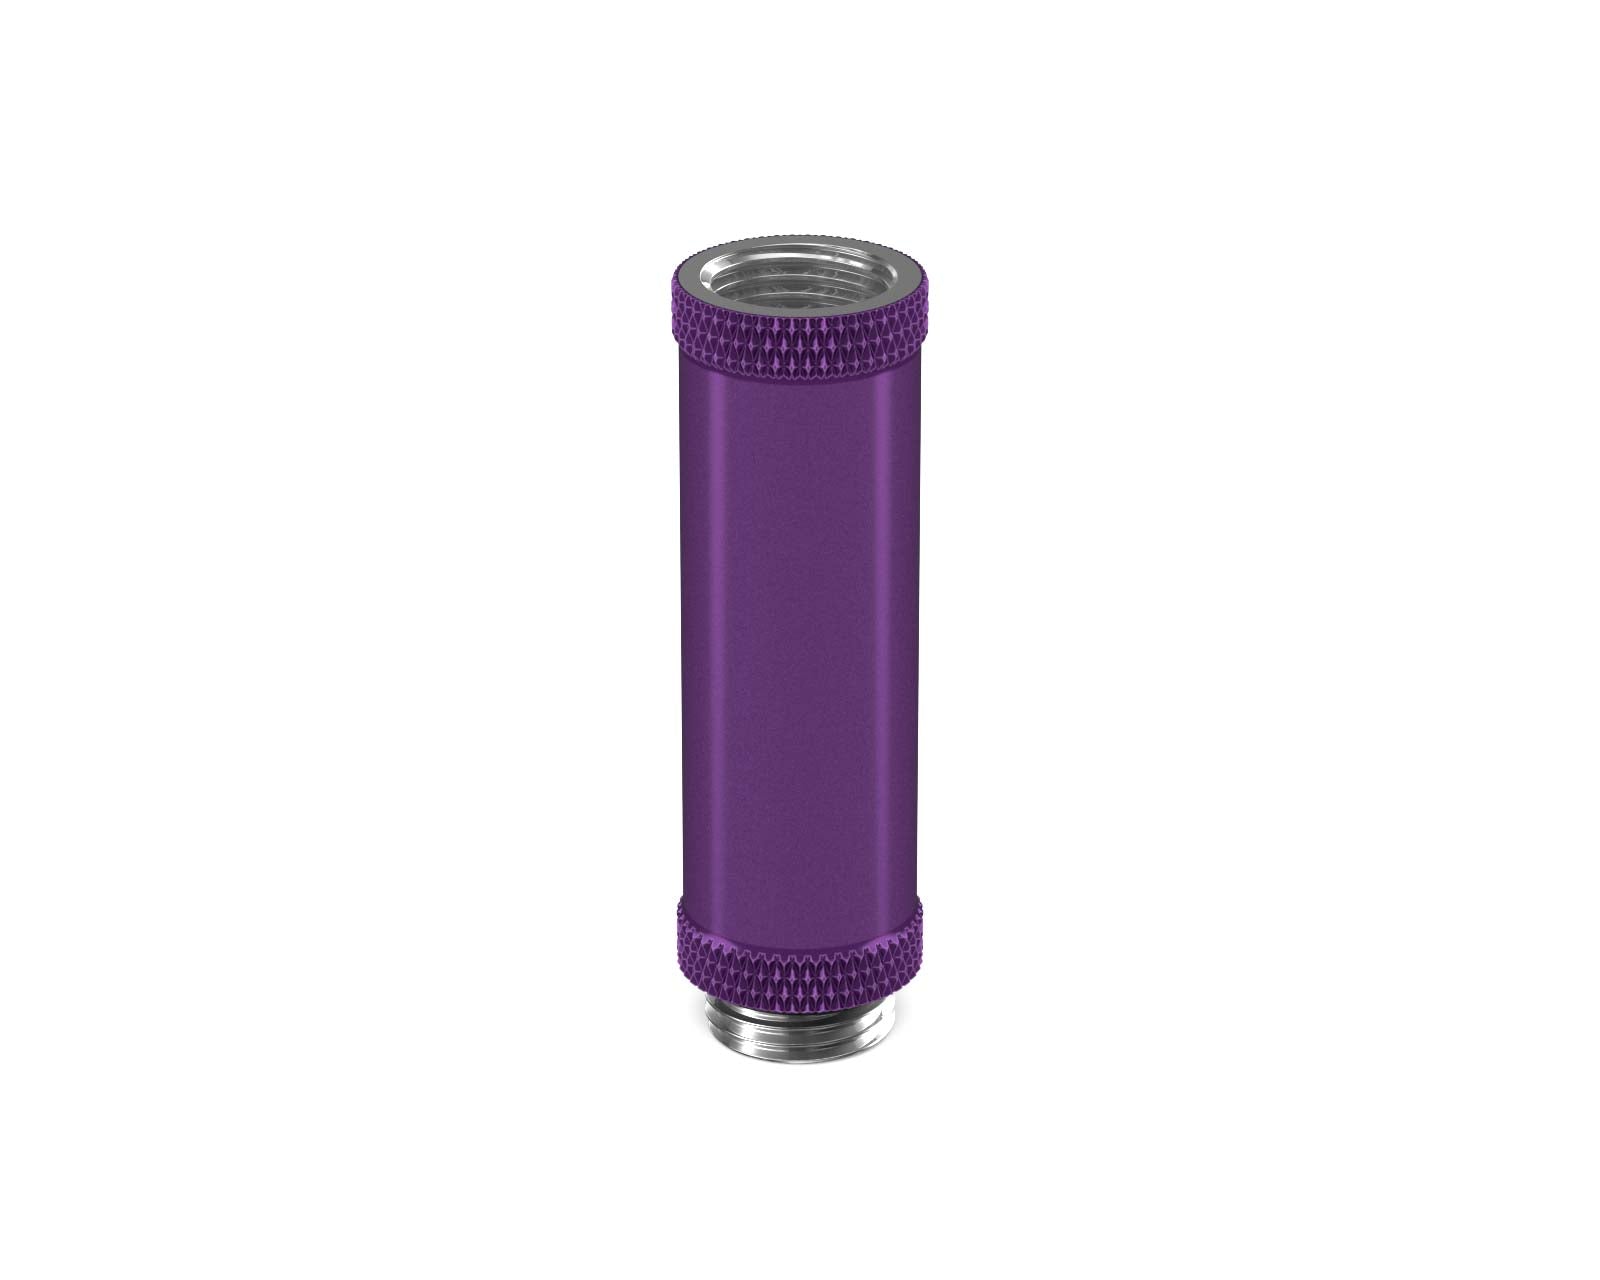 PrimoChill Male to Female G 1/4in. 50mm SX Extension Coupler - PrimoChill - KEEPING IT COOL Candy Purple